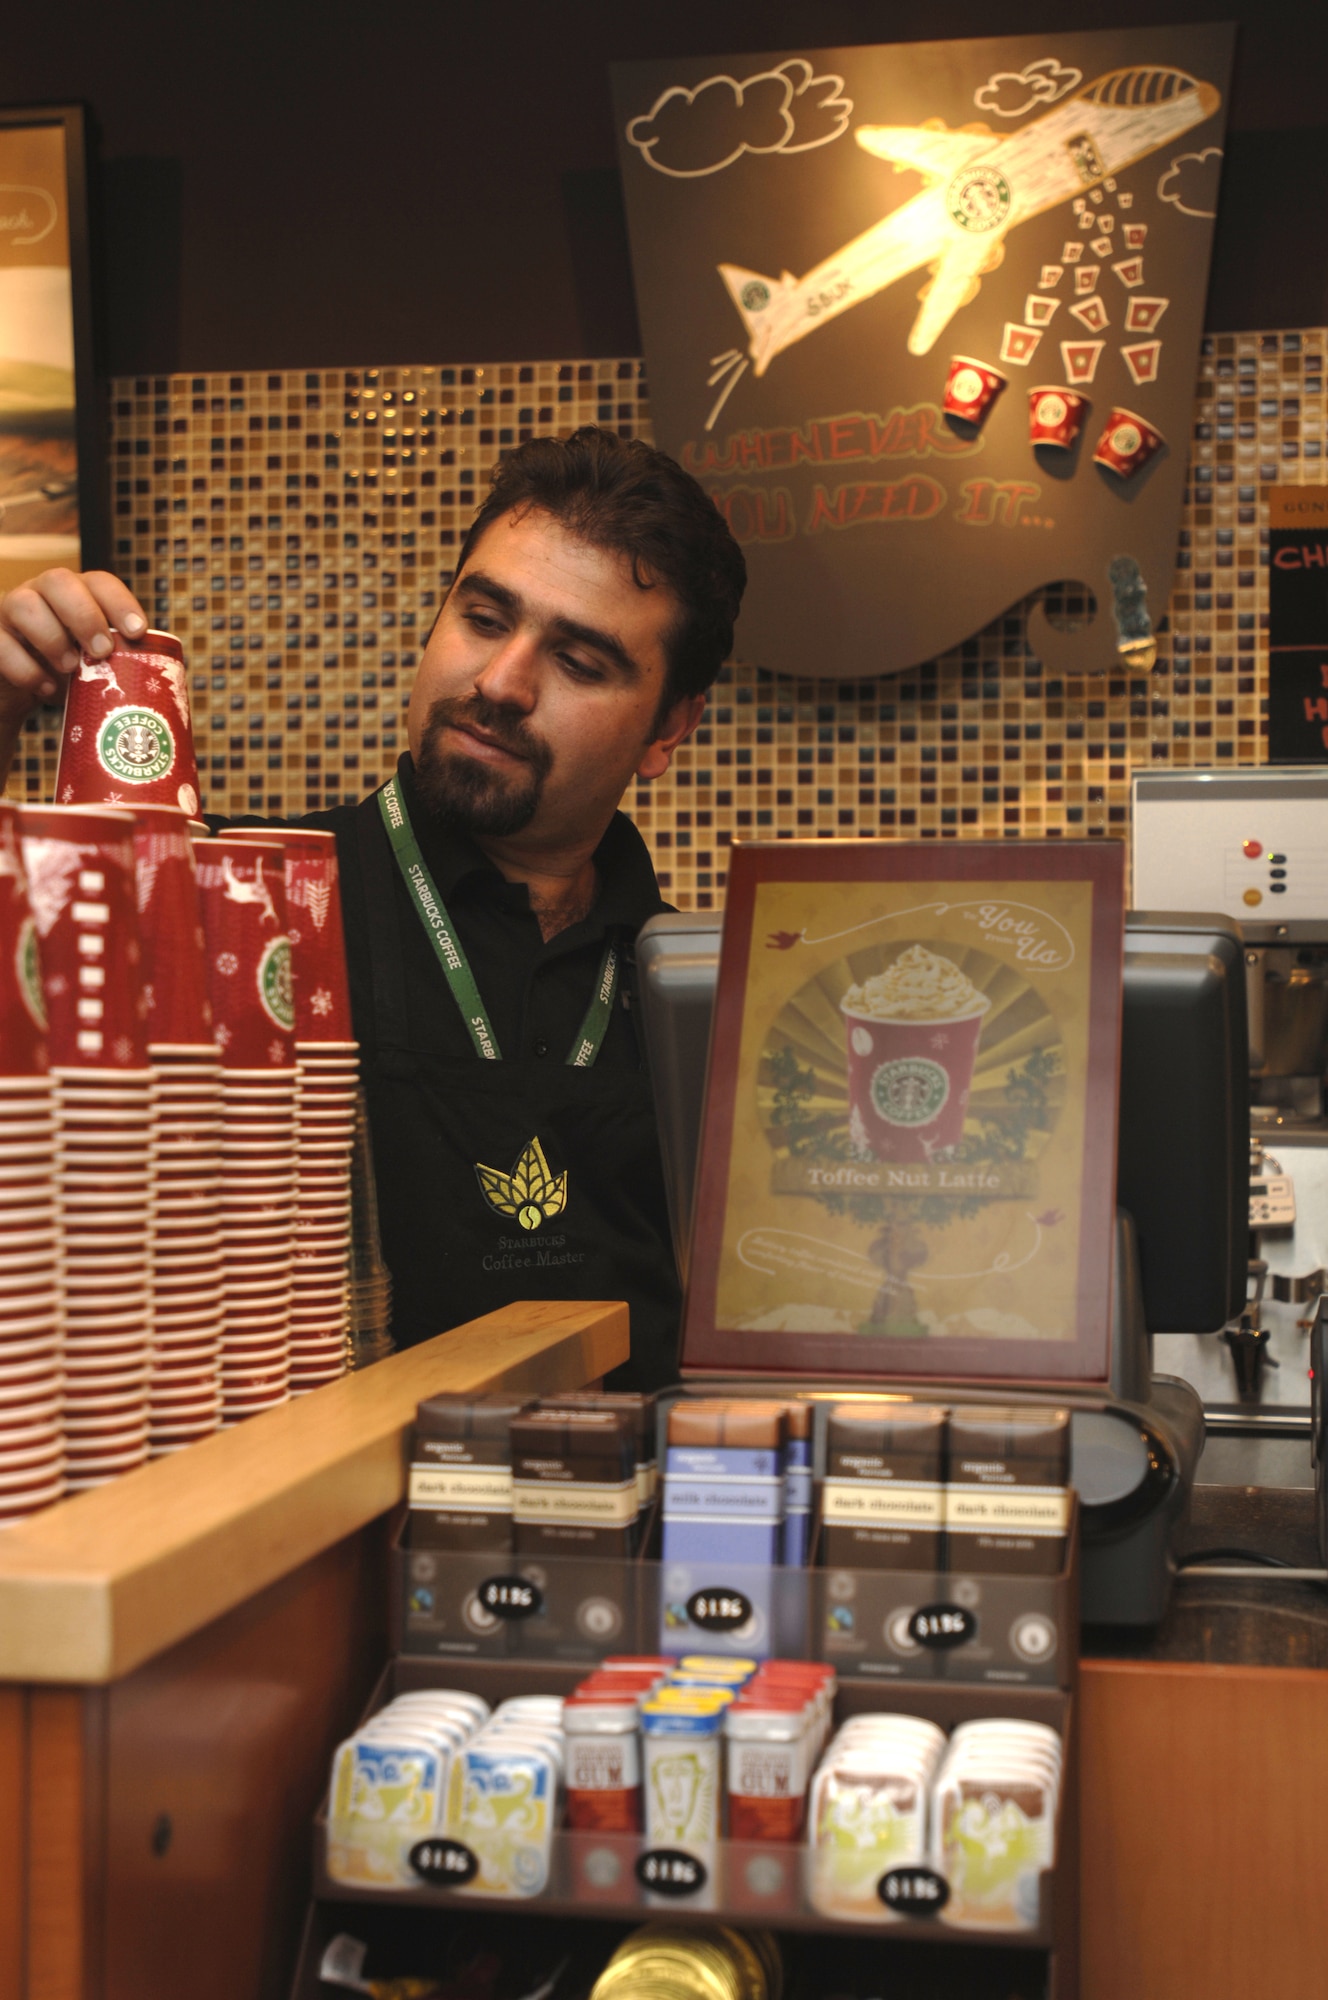 Ali Riza Nakis, Starbucks coffee master, stacks cups during the "soft opening" of Starbucks Coffee at Incirlik Air Base, Turkey, Dec 21. Certain base personnel were invited to attend this test run of the first Starbucks in United States Air Forces Europe. (U.S. Air Force photo illustration by Master Sgt. Edward Holzapfel)